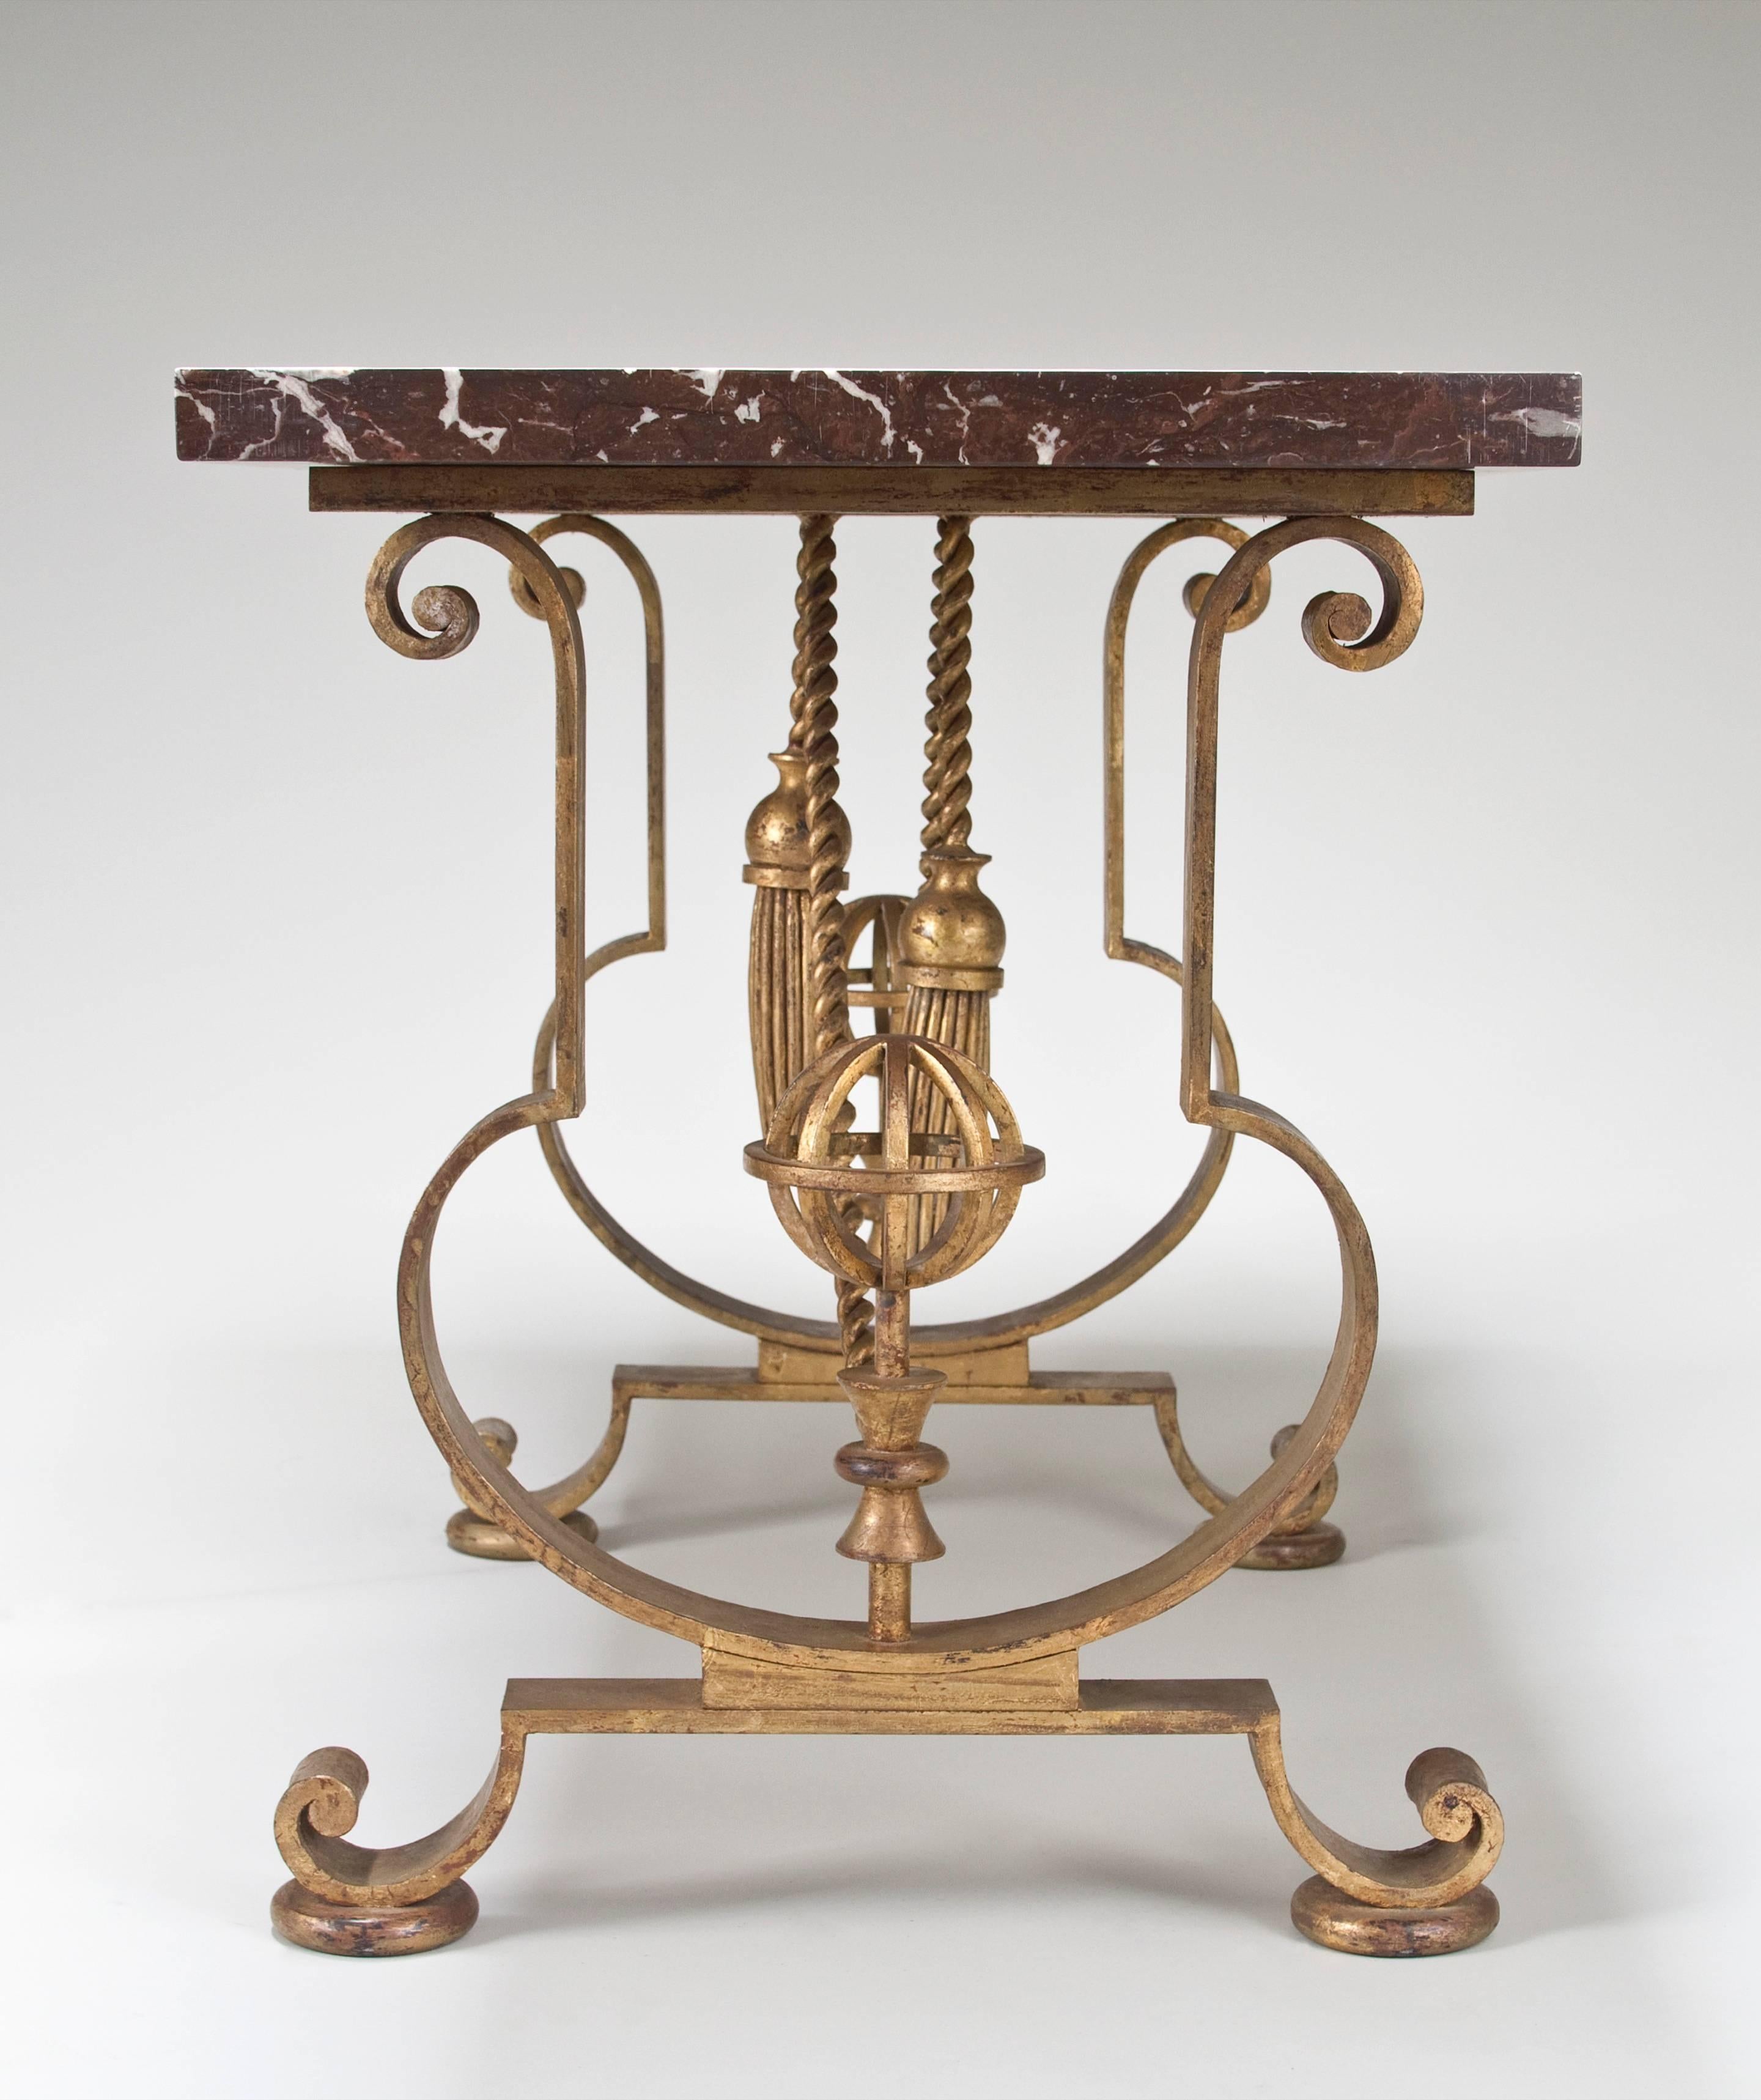 The rectangular rosso levanto marble top, above scrolled, lyre-shaped supports enclosing two astrolabes on hourglass plinths, joined by two ropes issuing draped tassels, the whole on scrolled legs above rounded disk feet. 

A Certificate of